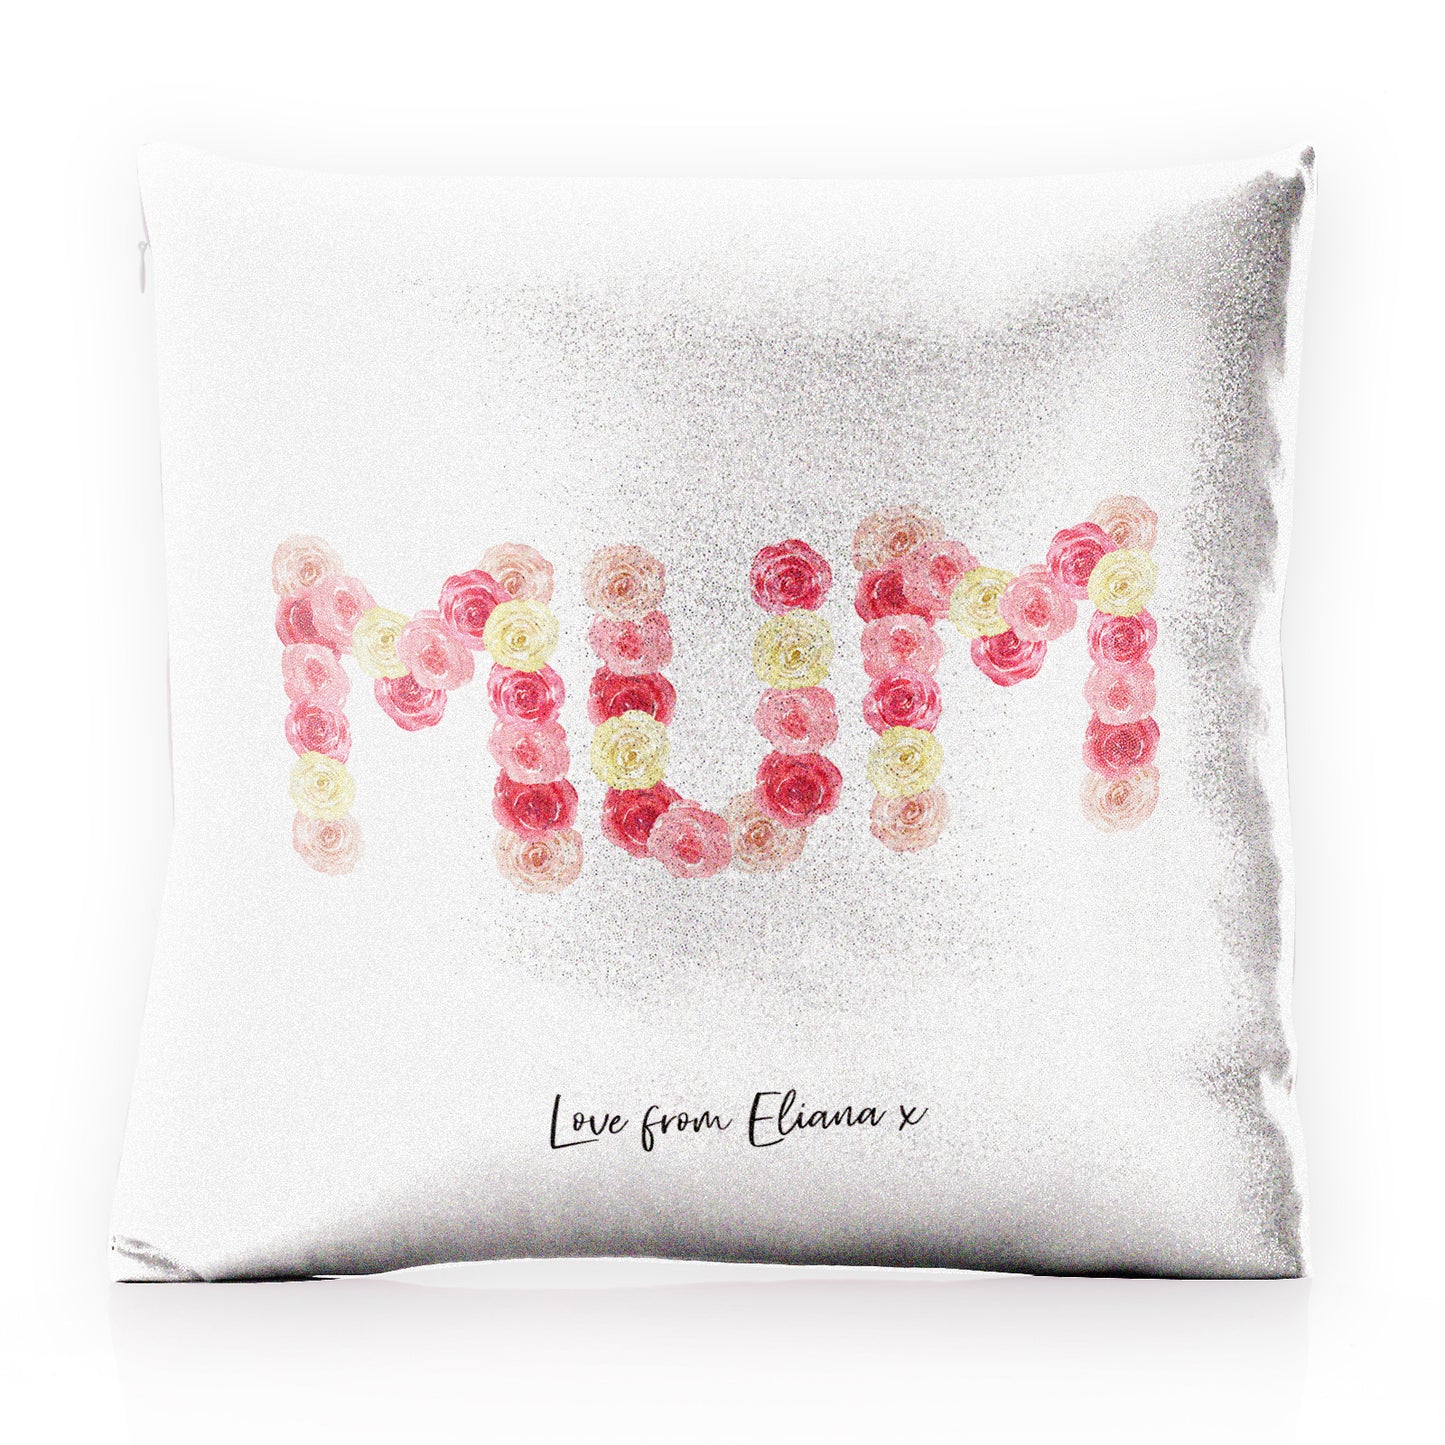 Personalised Glitter Cushion with Stylish Text and Floral MUM